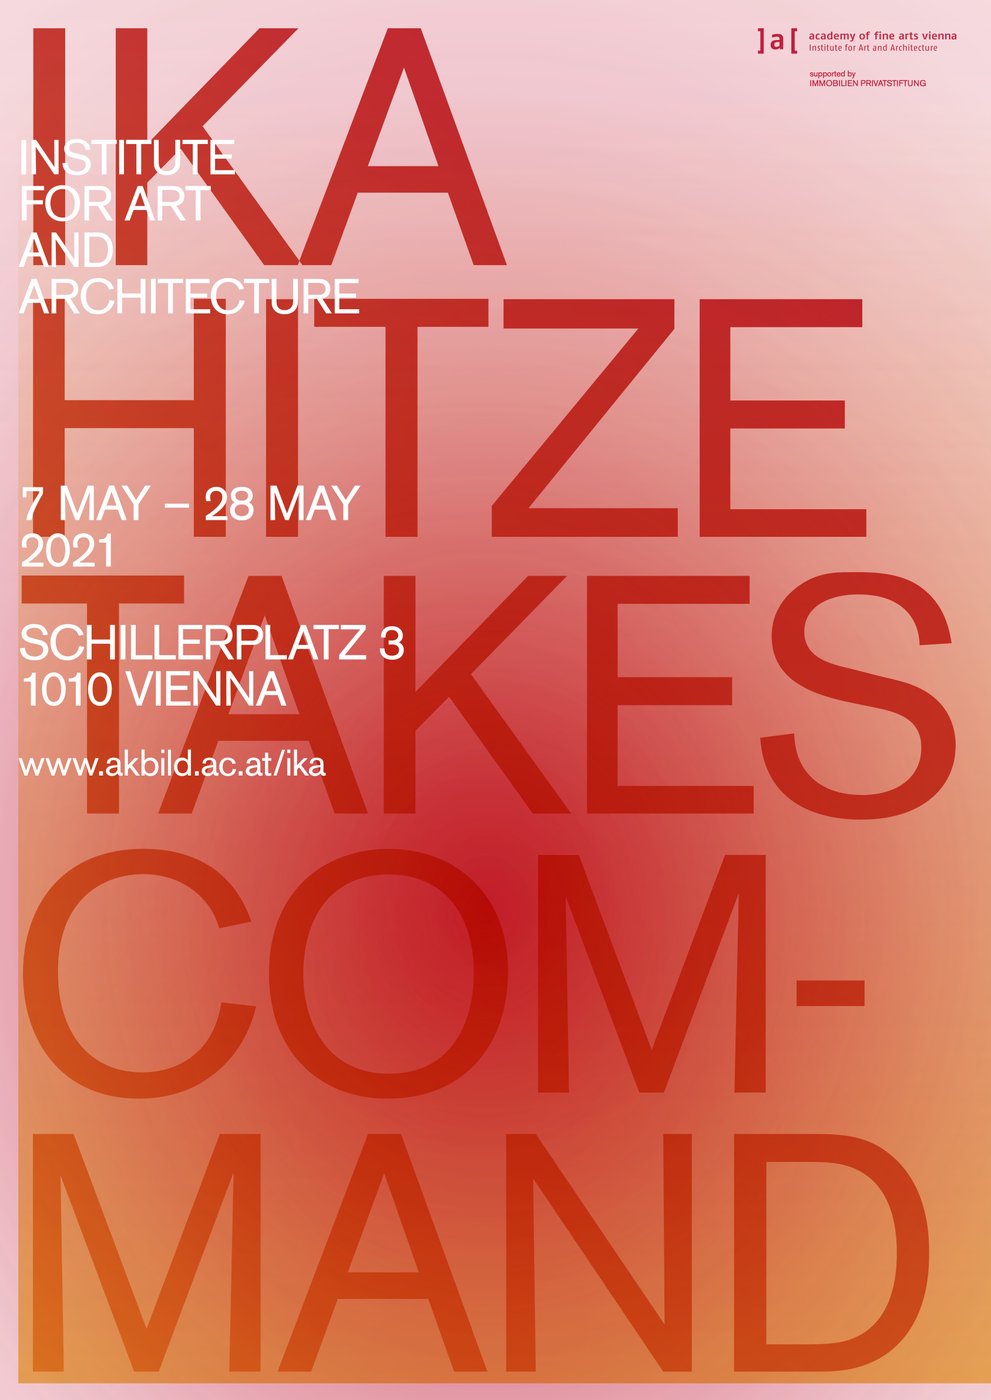 The exhibition
 
  HITZE TAKES COMMAND
 
 will occupy the building of the Academy at Schillerplatz with a spatial installation from May 7 until May 28, which will also be the first public event after the general renovation.


 
  PLEASE NOTE:
 
 In advance of your visit to the exhibition, a registration at the information point at Schillerplatz is necessary due to the current COVID-19 regulations. It is not possible to enter the building independently. Your data will be treated confidentially, stored securely and deleted after the 28-day period.